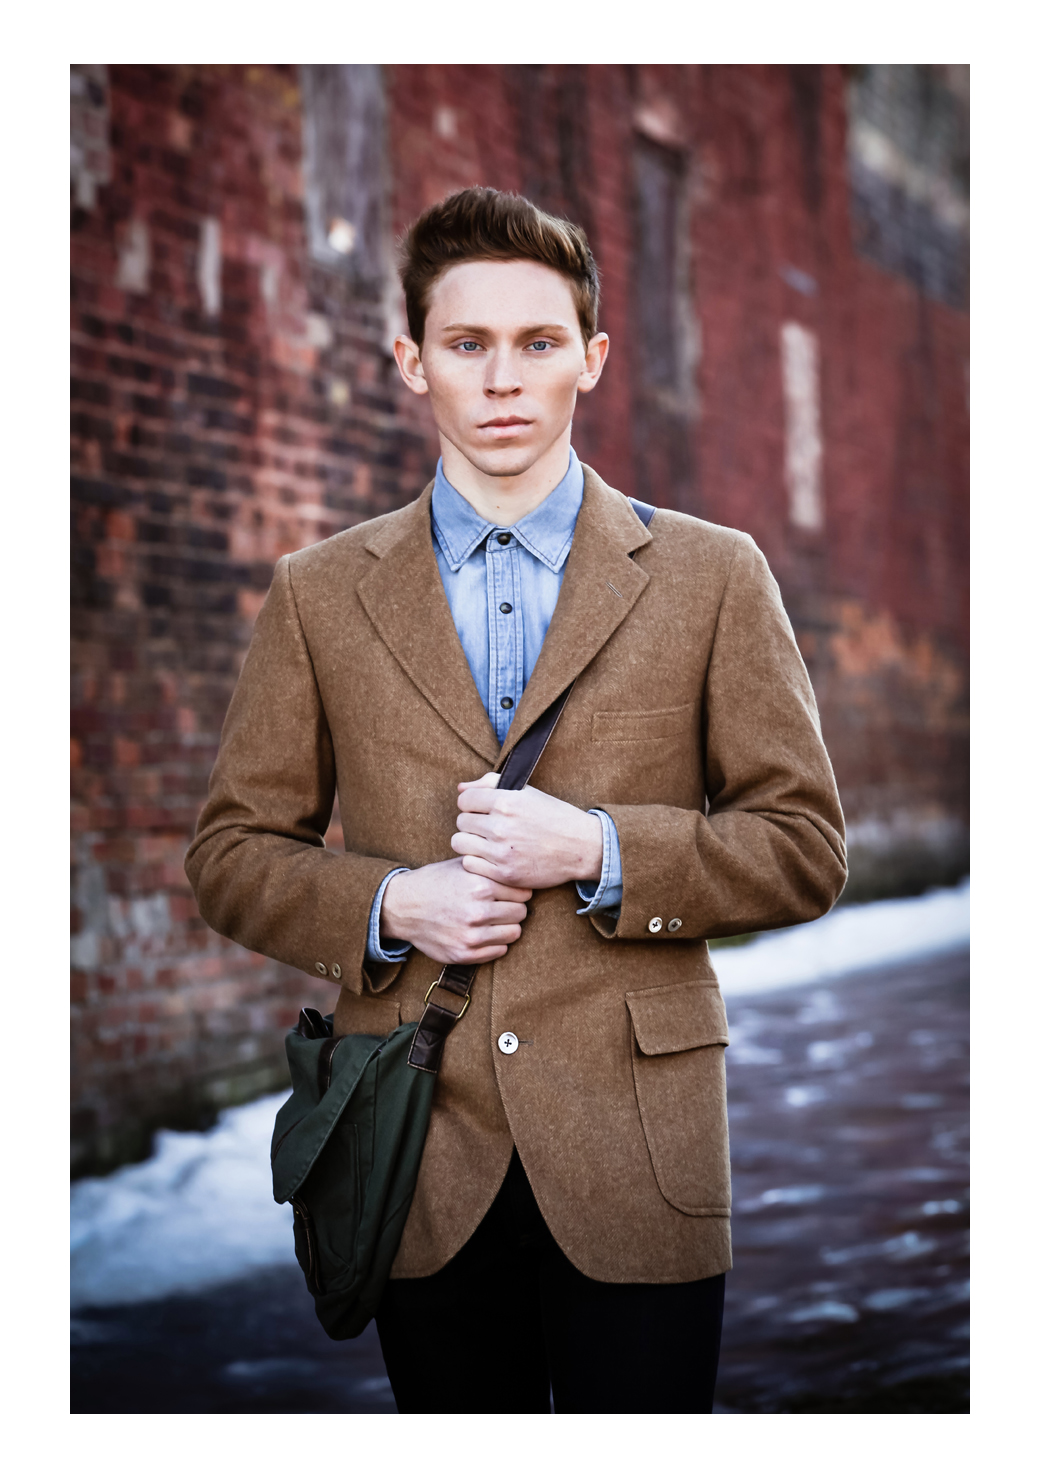 A young man with high auburn hair and freckles models, facing the cameraman while wearing a tweed suit in front of a brick wall